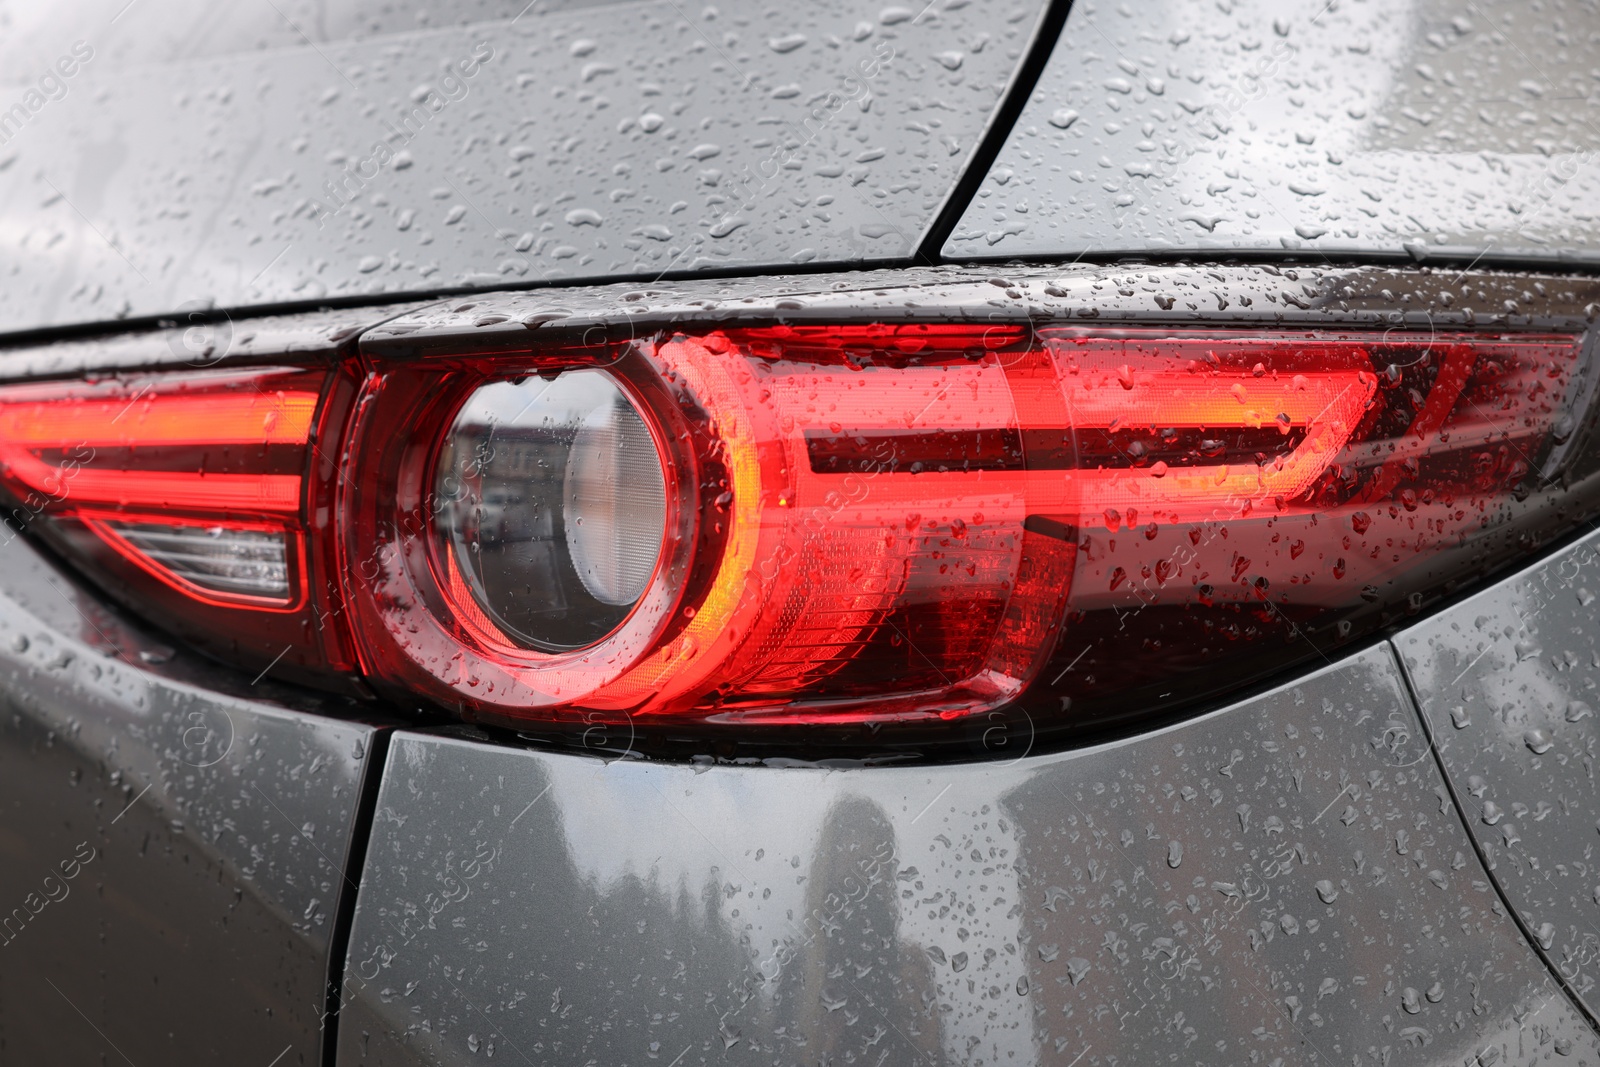 Photo of Car with switched on tail light in drops of water, closeup